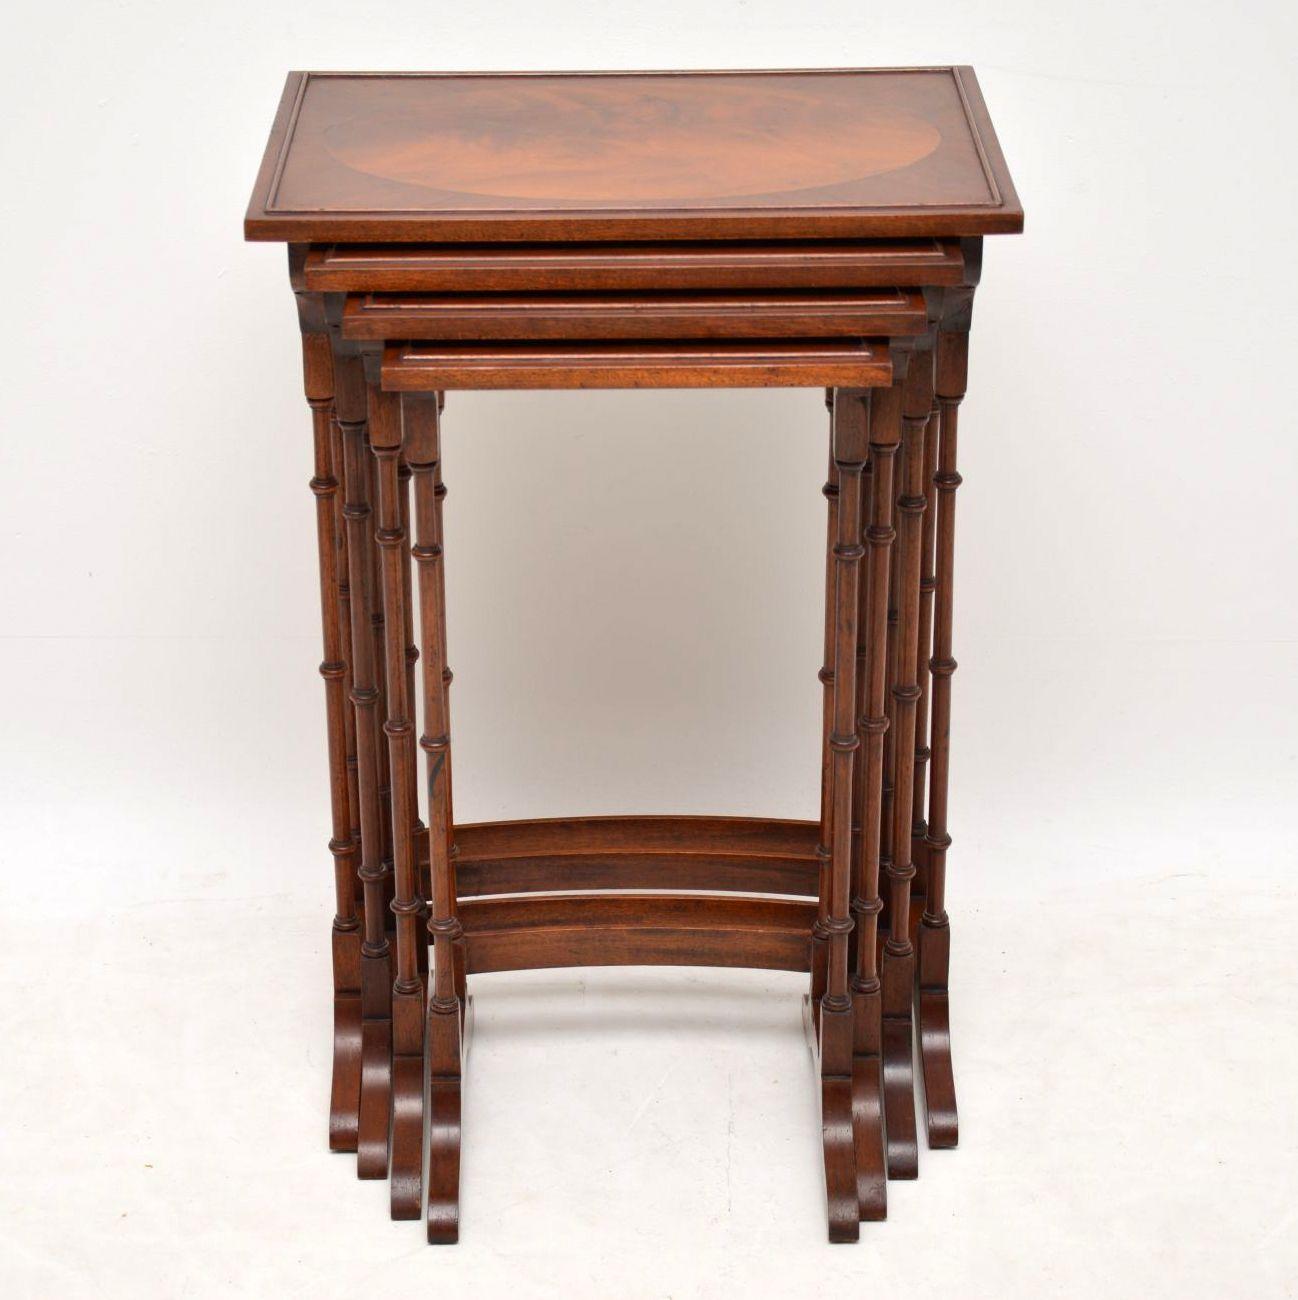 Antique Regency style mahogany nest of four tables of very high quality and in excellent condition, having just been French polished and dating from circa 1920s period. Each tabletop has an oval flame mahogany panel inset in the middle, with an